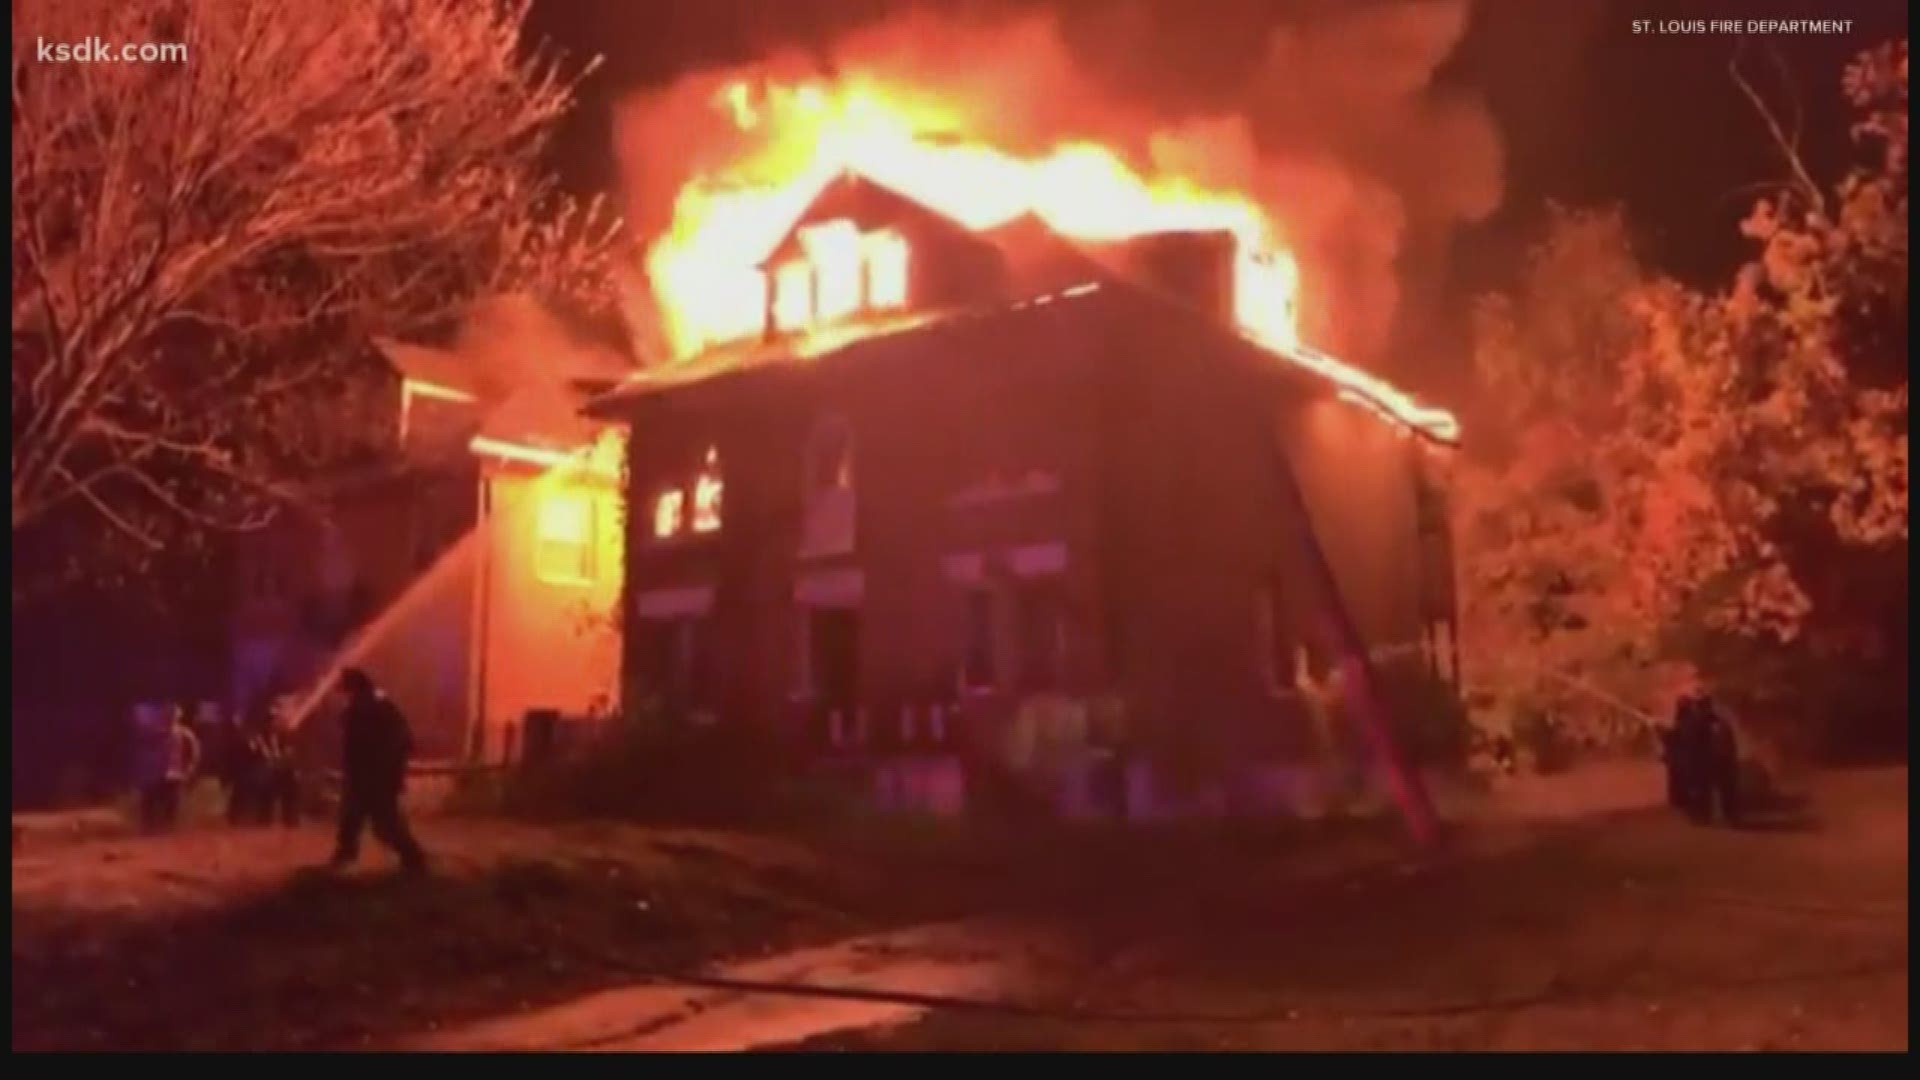 2 injured in north St. Louis fire